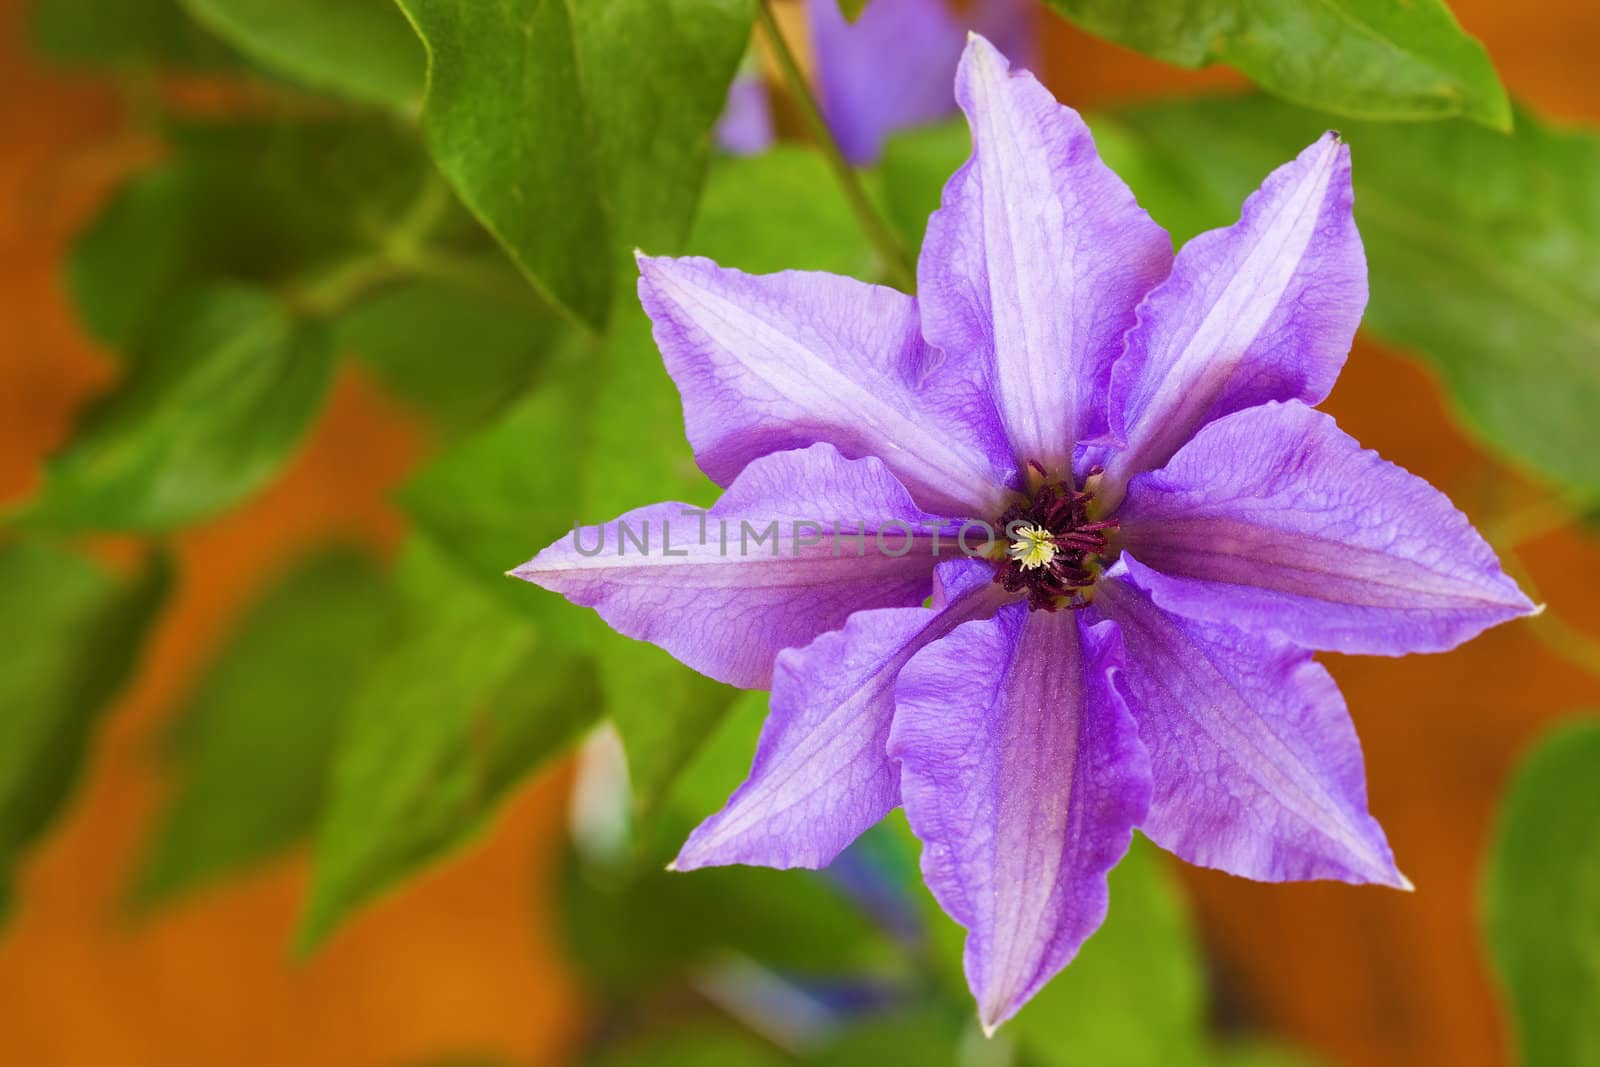 Beautiful flower (clematis) and leafs on yellow background. Shallow depth of field.